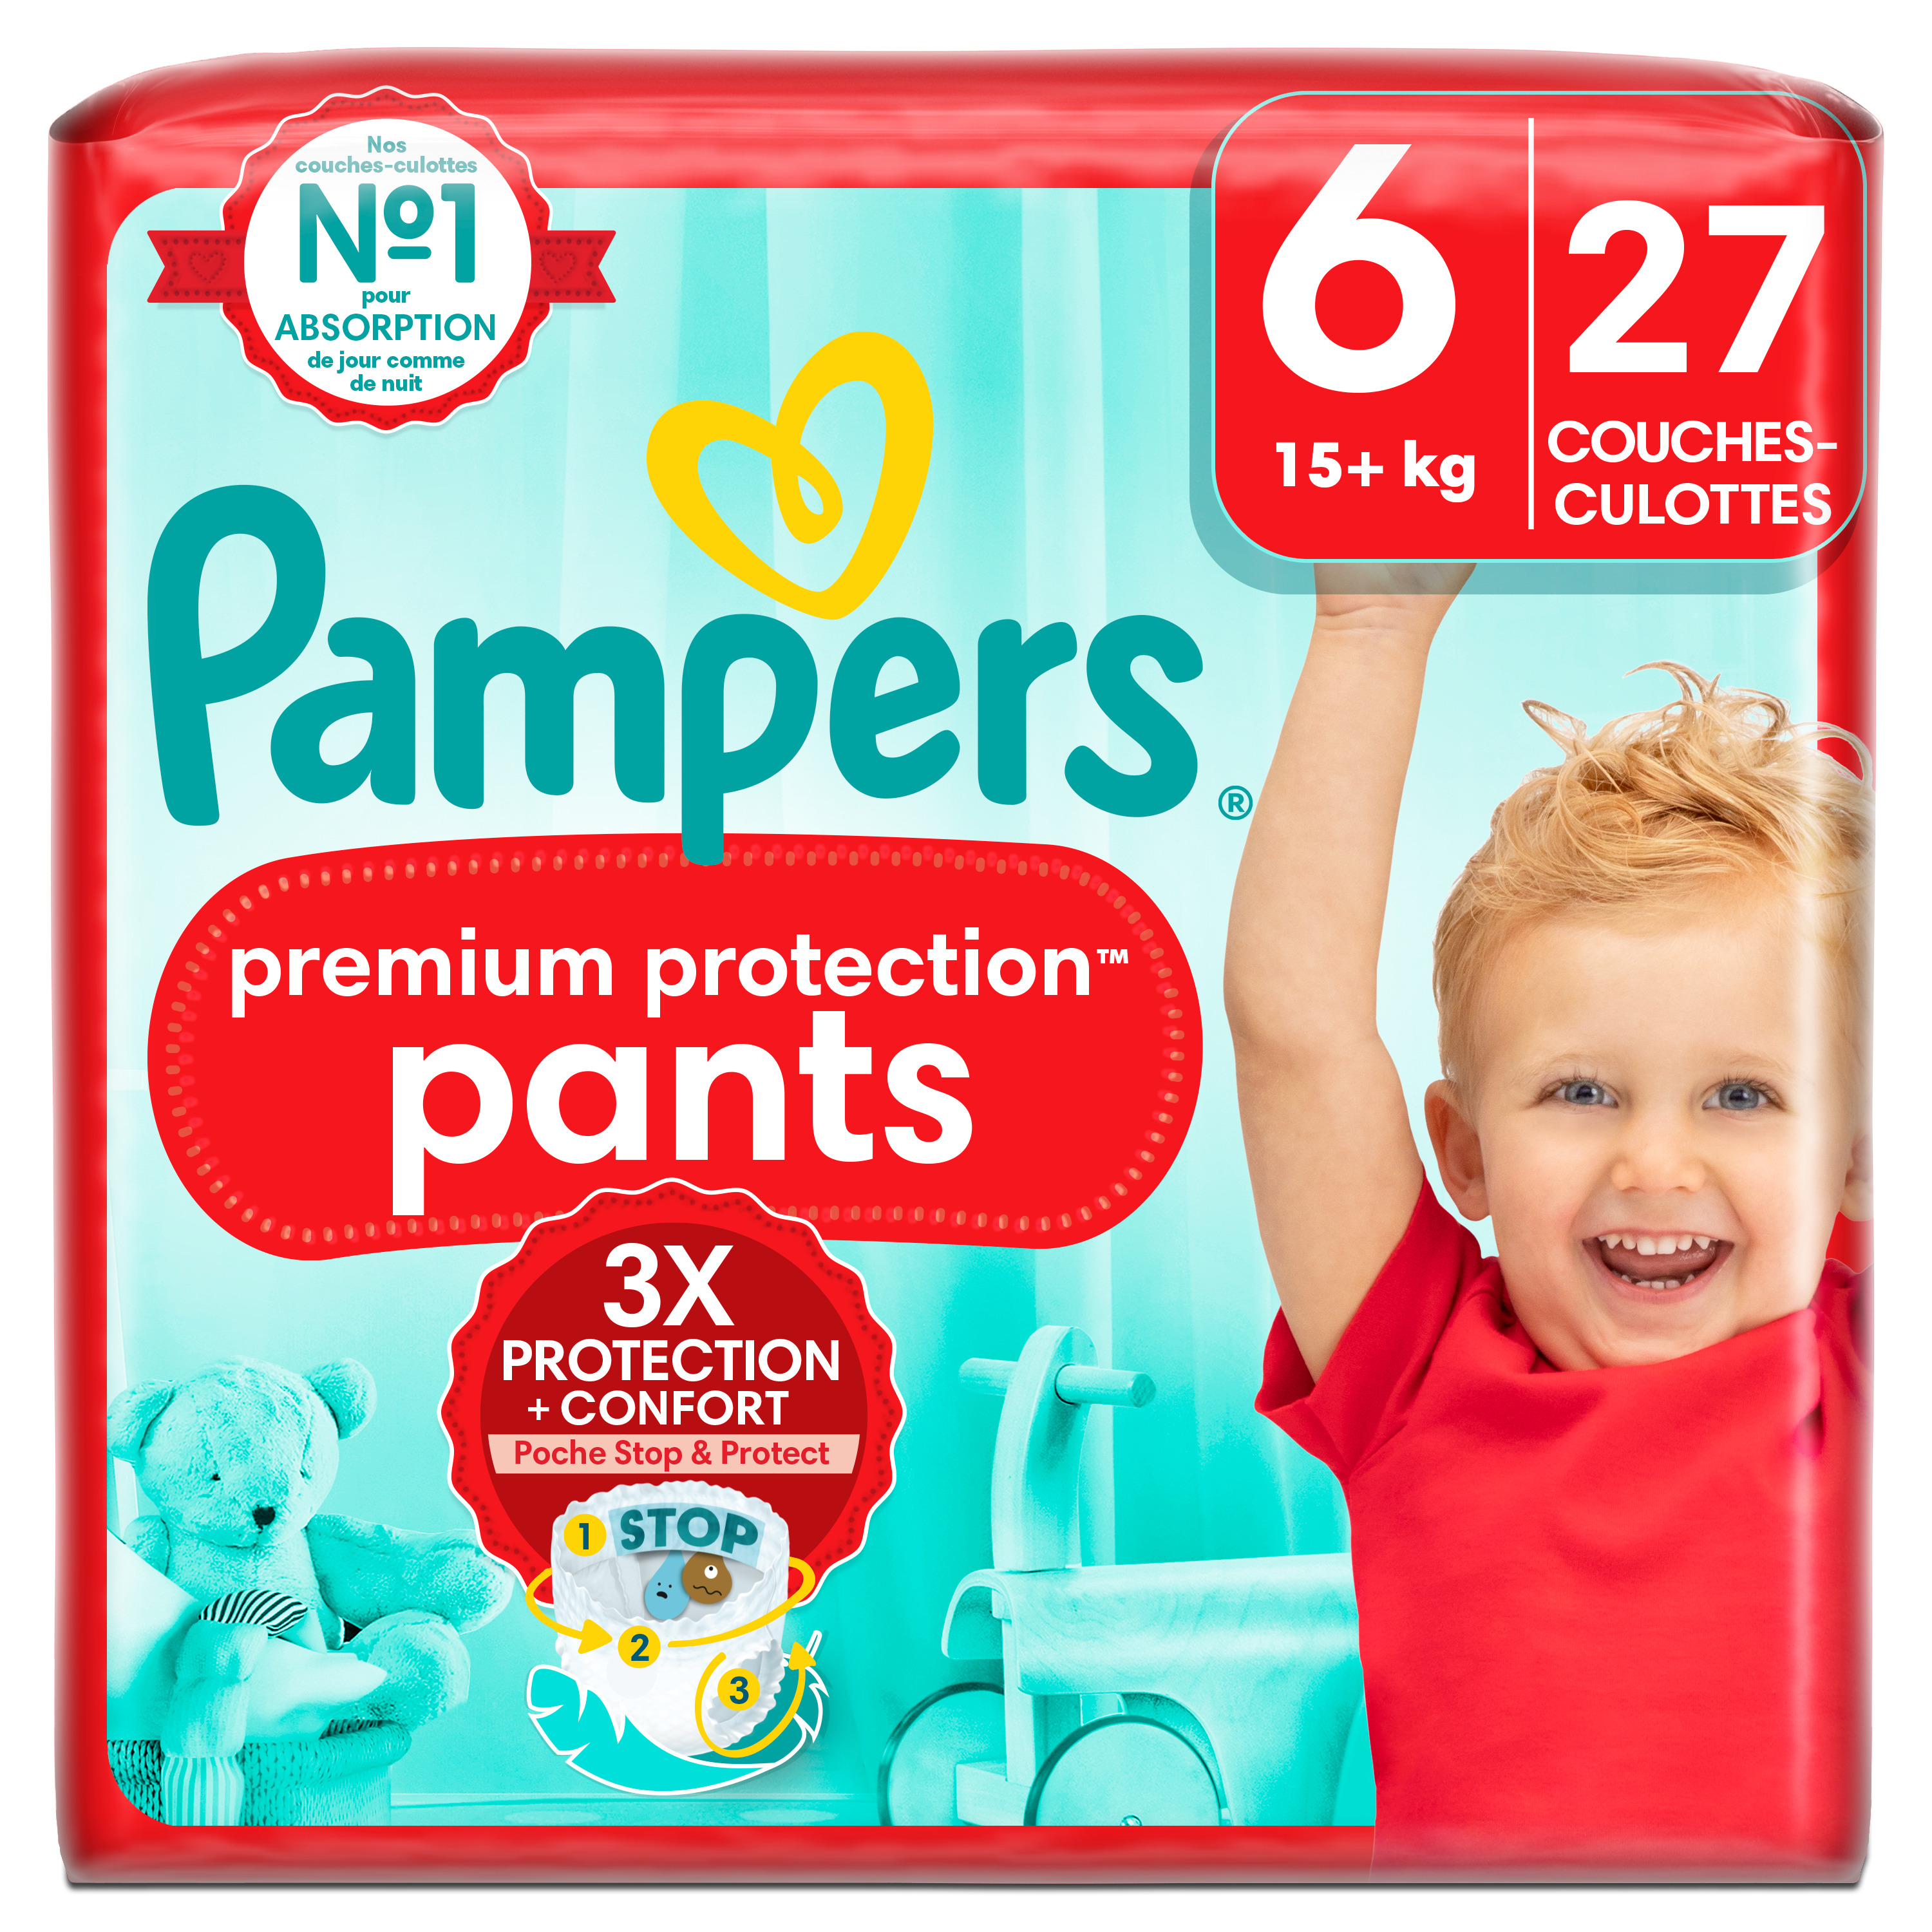 Pampers Couches-culottes Premium Protection Pants taille 6 - Achat